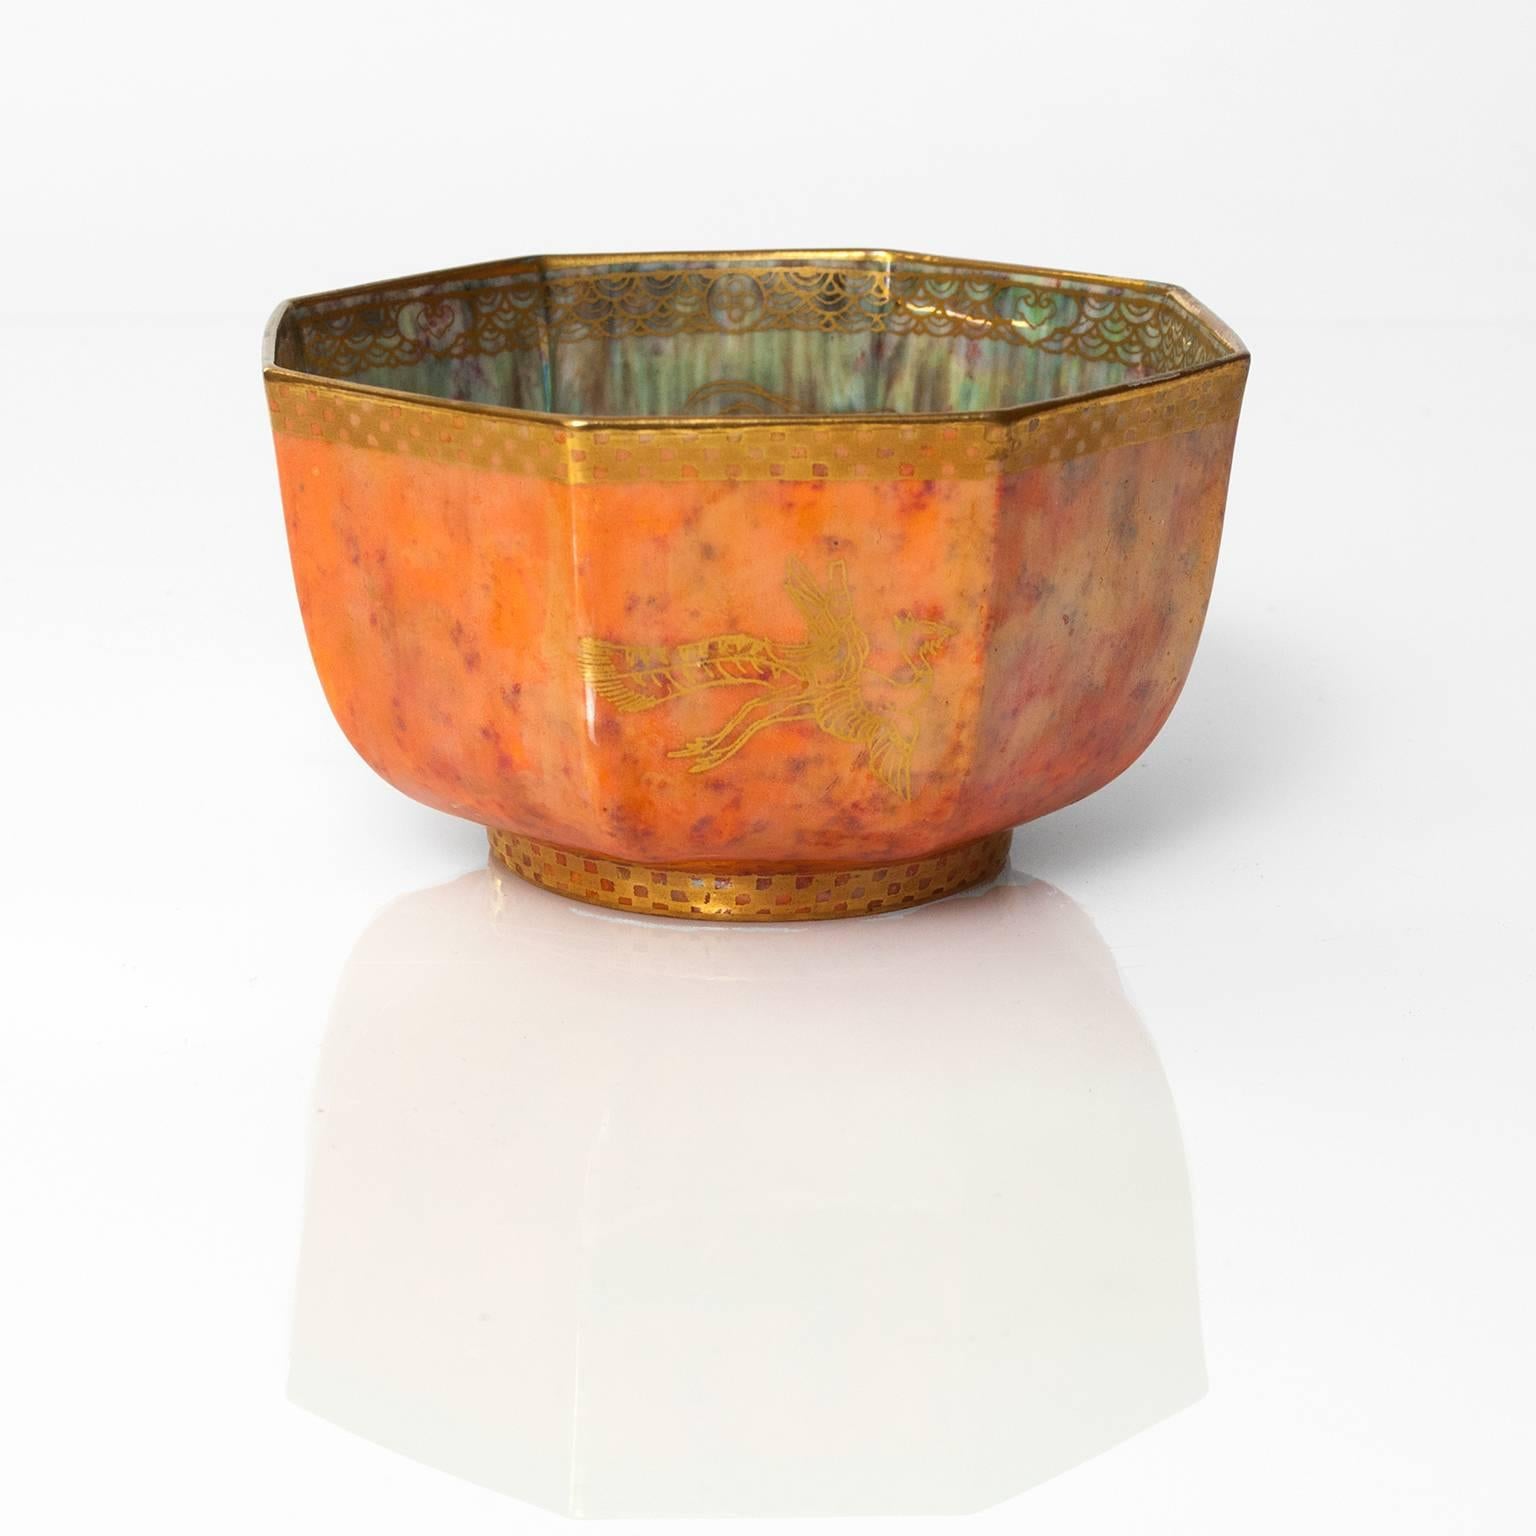 A finely decorated Wedgwood fairyland lustre bowl designed by Daisy Makeig-Jones. The bowl's mottled orange exterior is decorated with gold on the inner and outside. Excellent condition. Measures: Diameter: 5", height: 2.75".

The